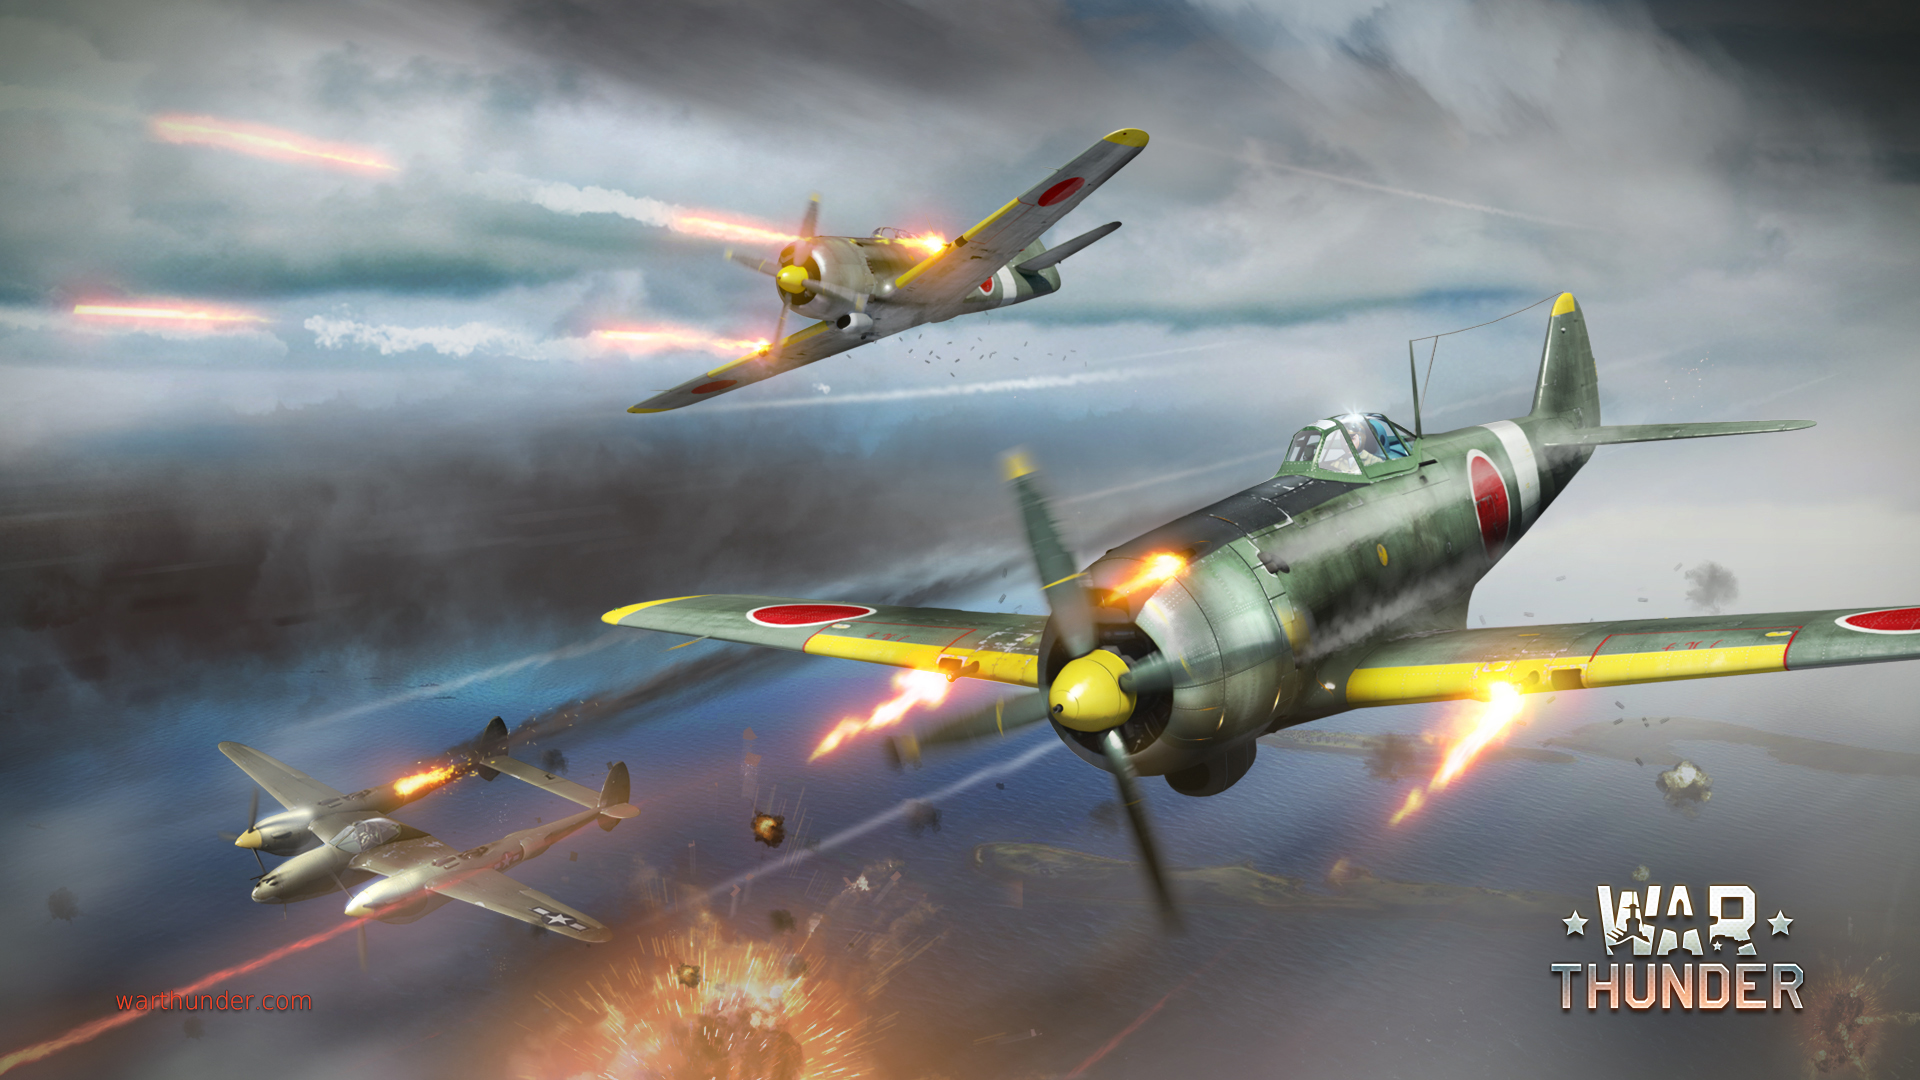 War Thunder Loading Screens On Your Desktop News Discussion